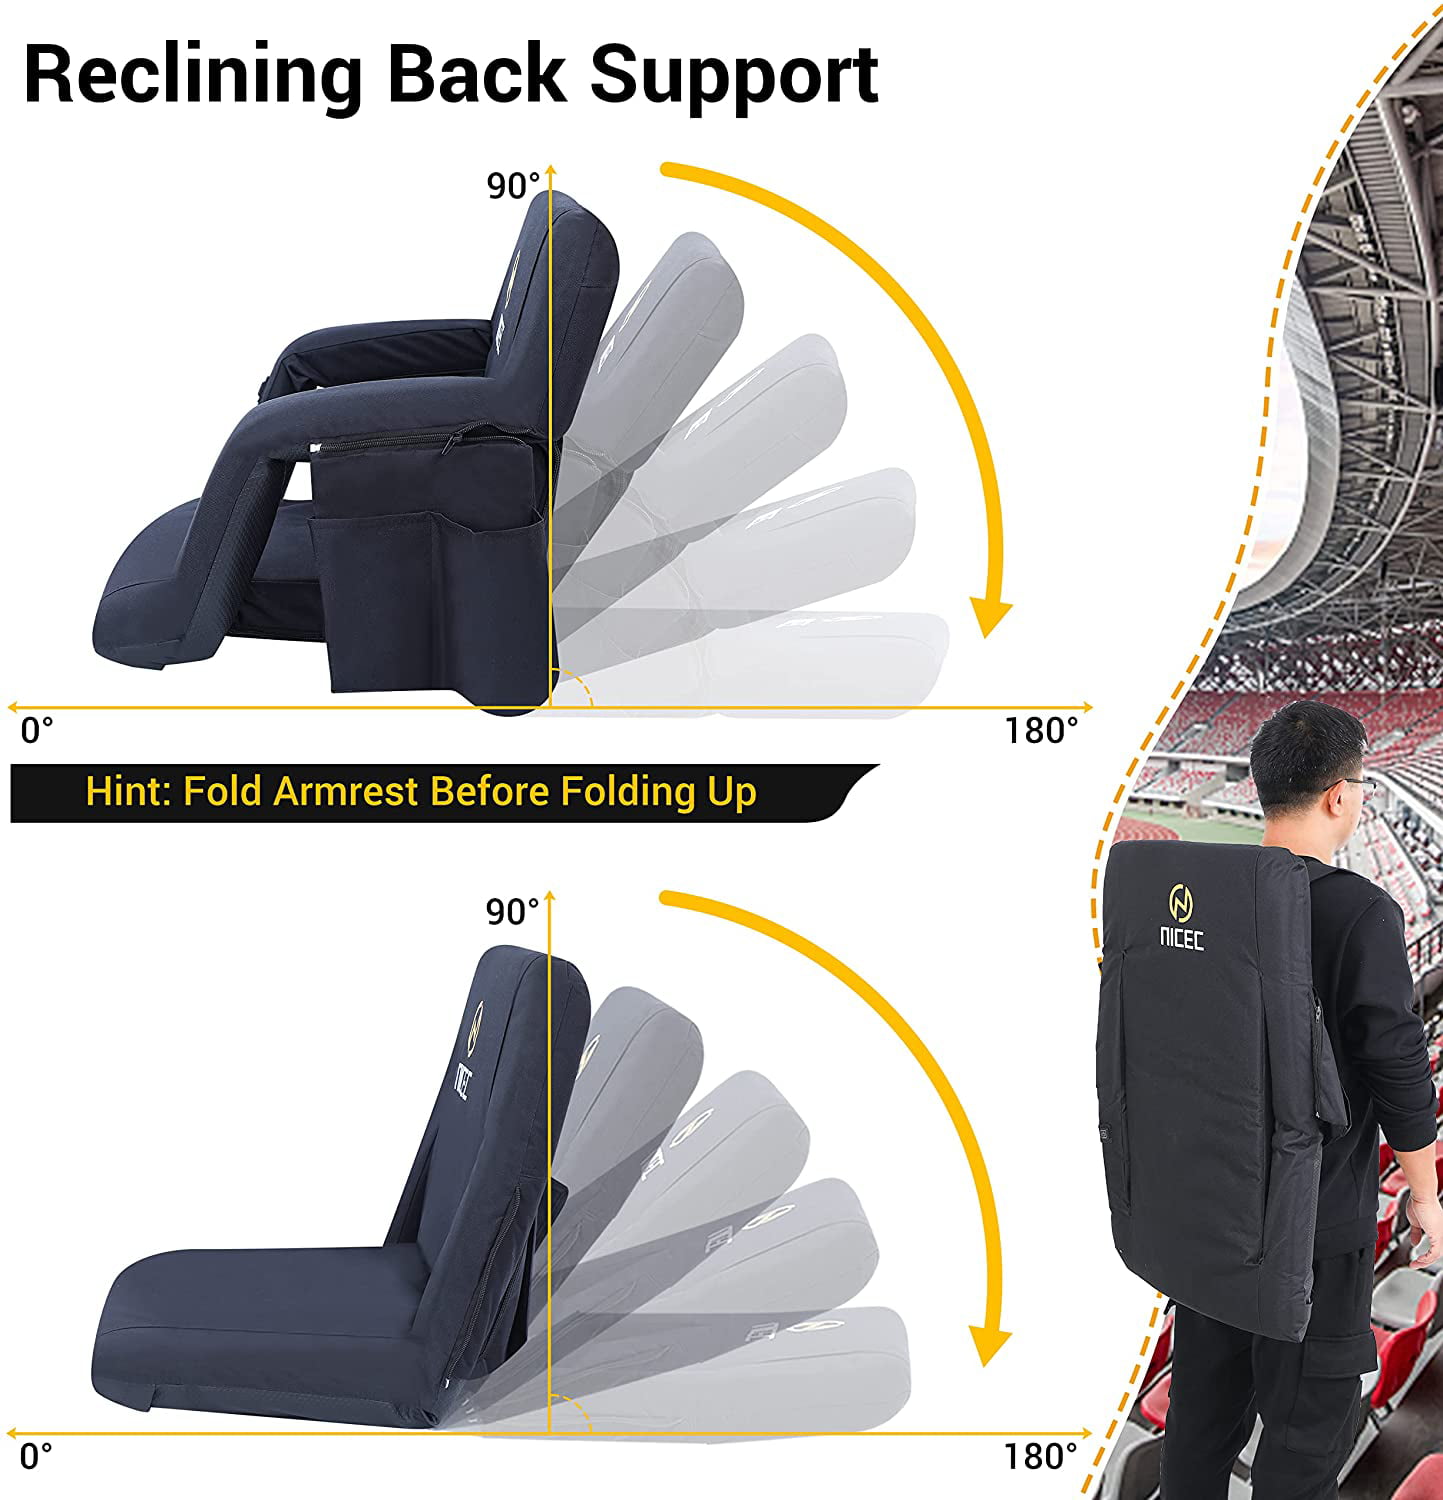 Foldable NO Power Bank Bleacher Chairs with Shoulder Straps & Net Pockets Extra Thick Padding Nice C Heated Stadium Seats 5 Reclining Positions Waterproof Cushion 